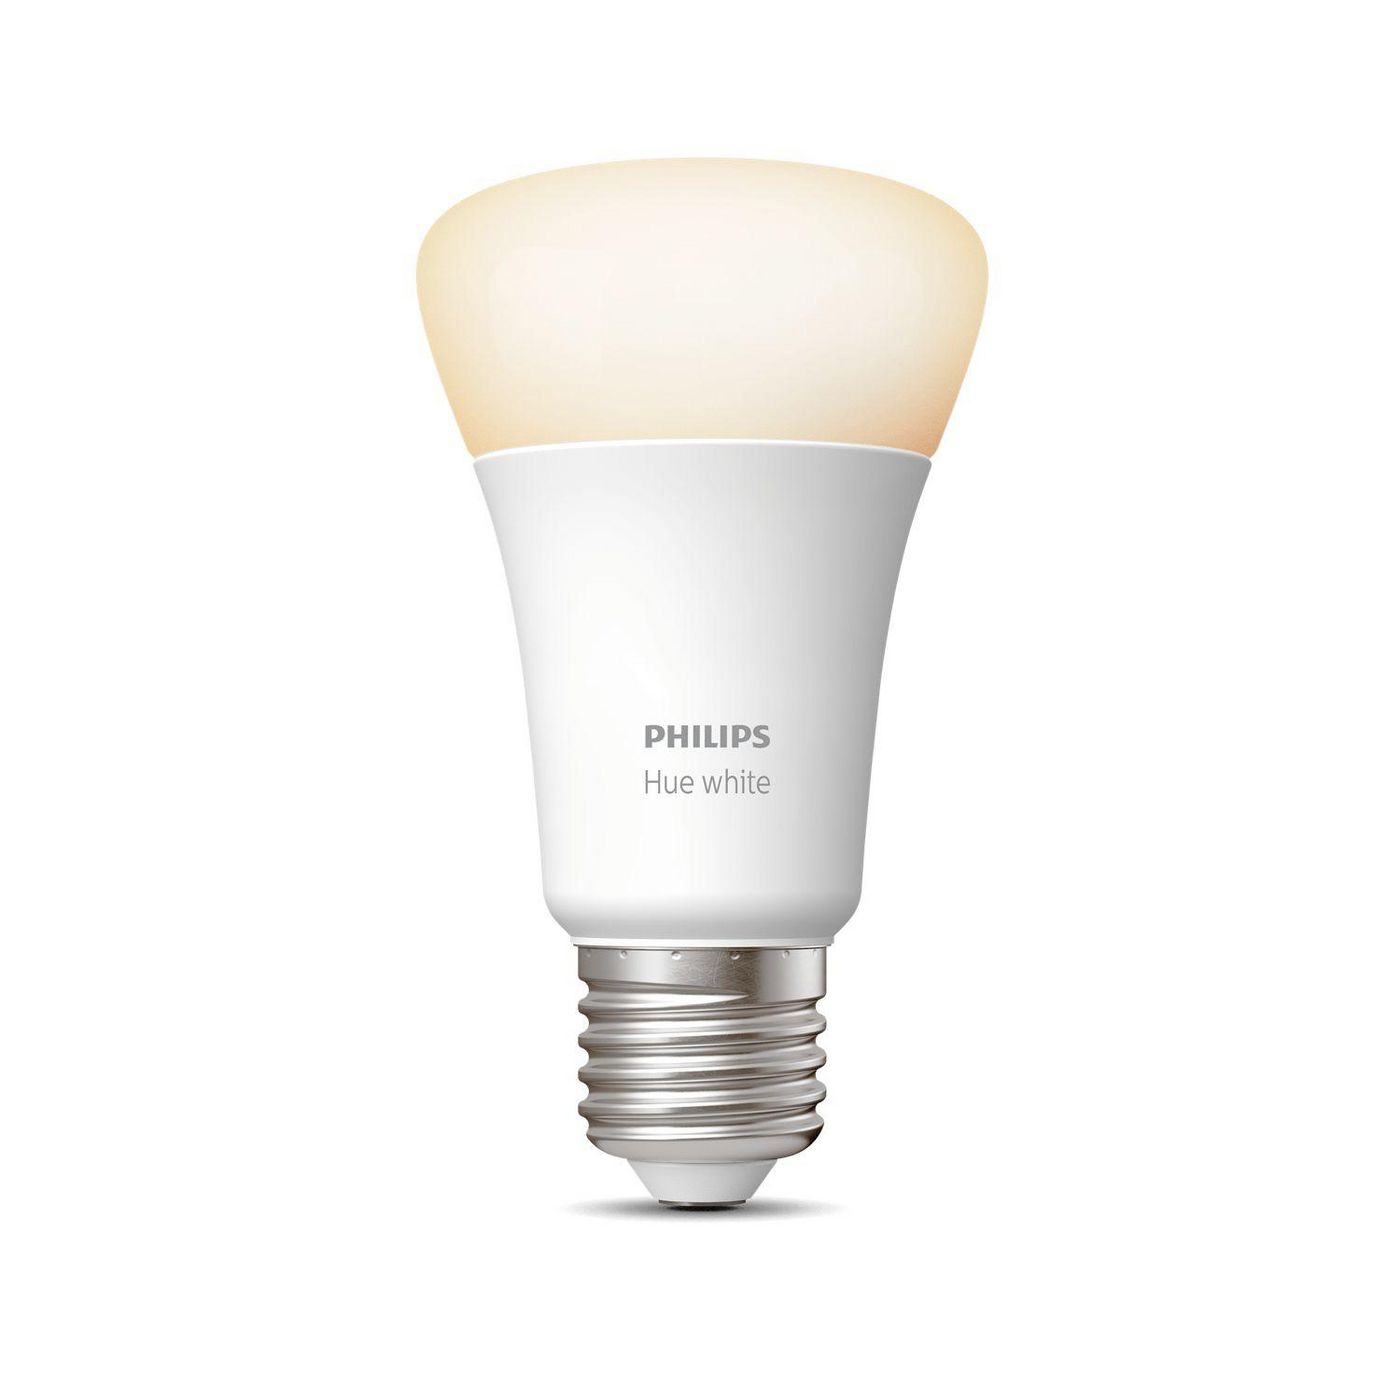 Philips-by-Signify 929001821602 Hue White E27 Bulb - BT 